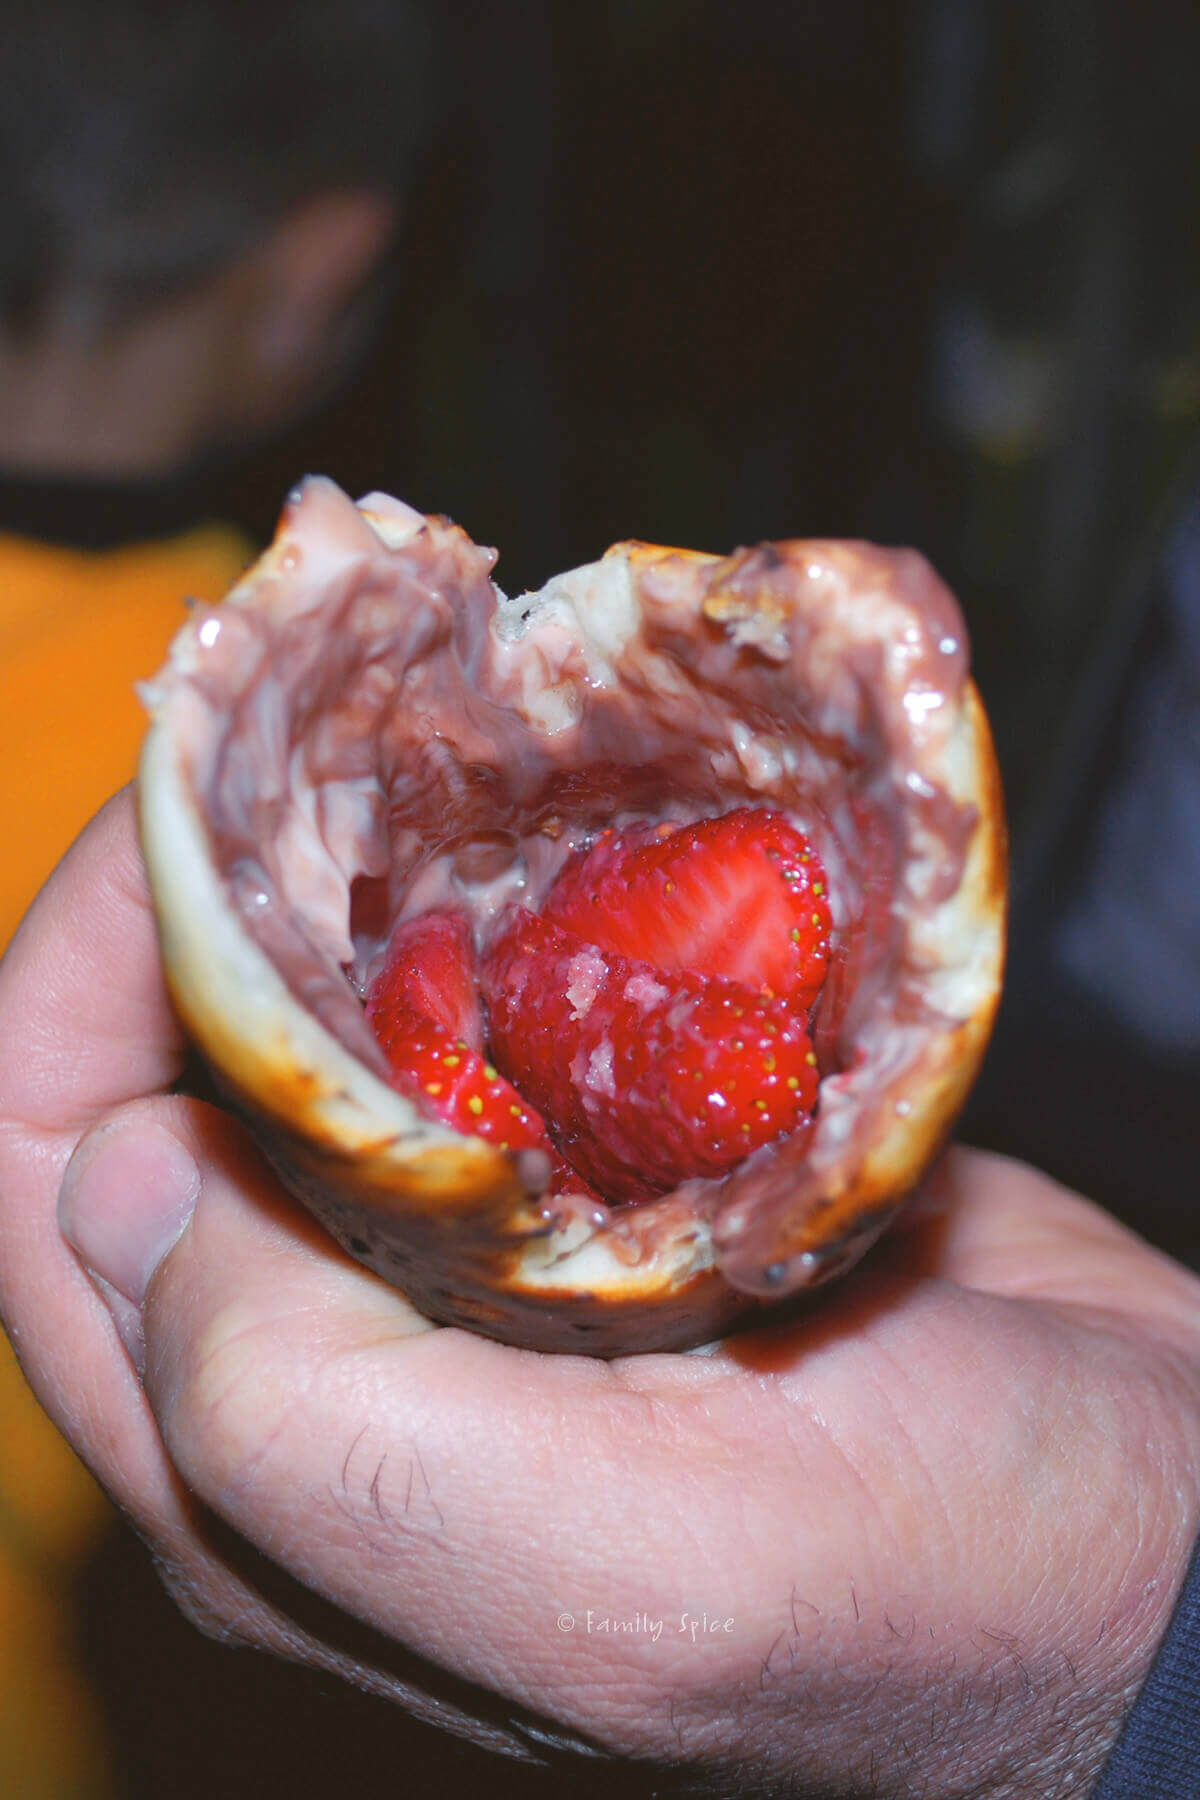 Strawberry slices inside a cooked campfire eclair with chocolate pudding inside